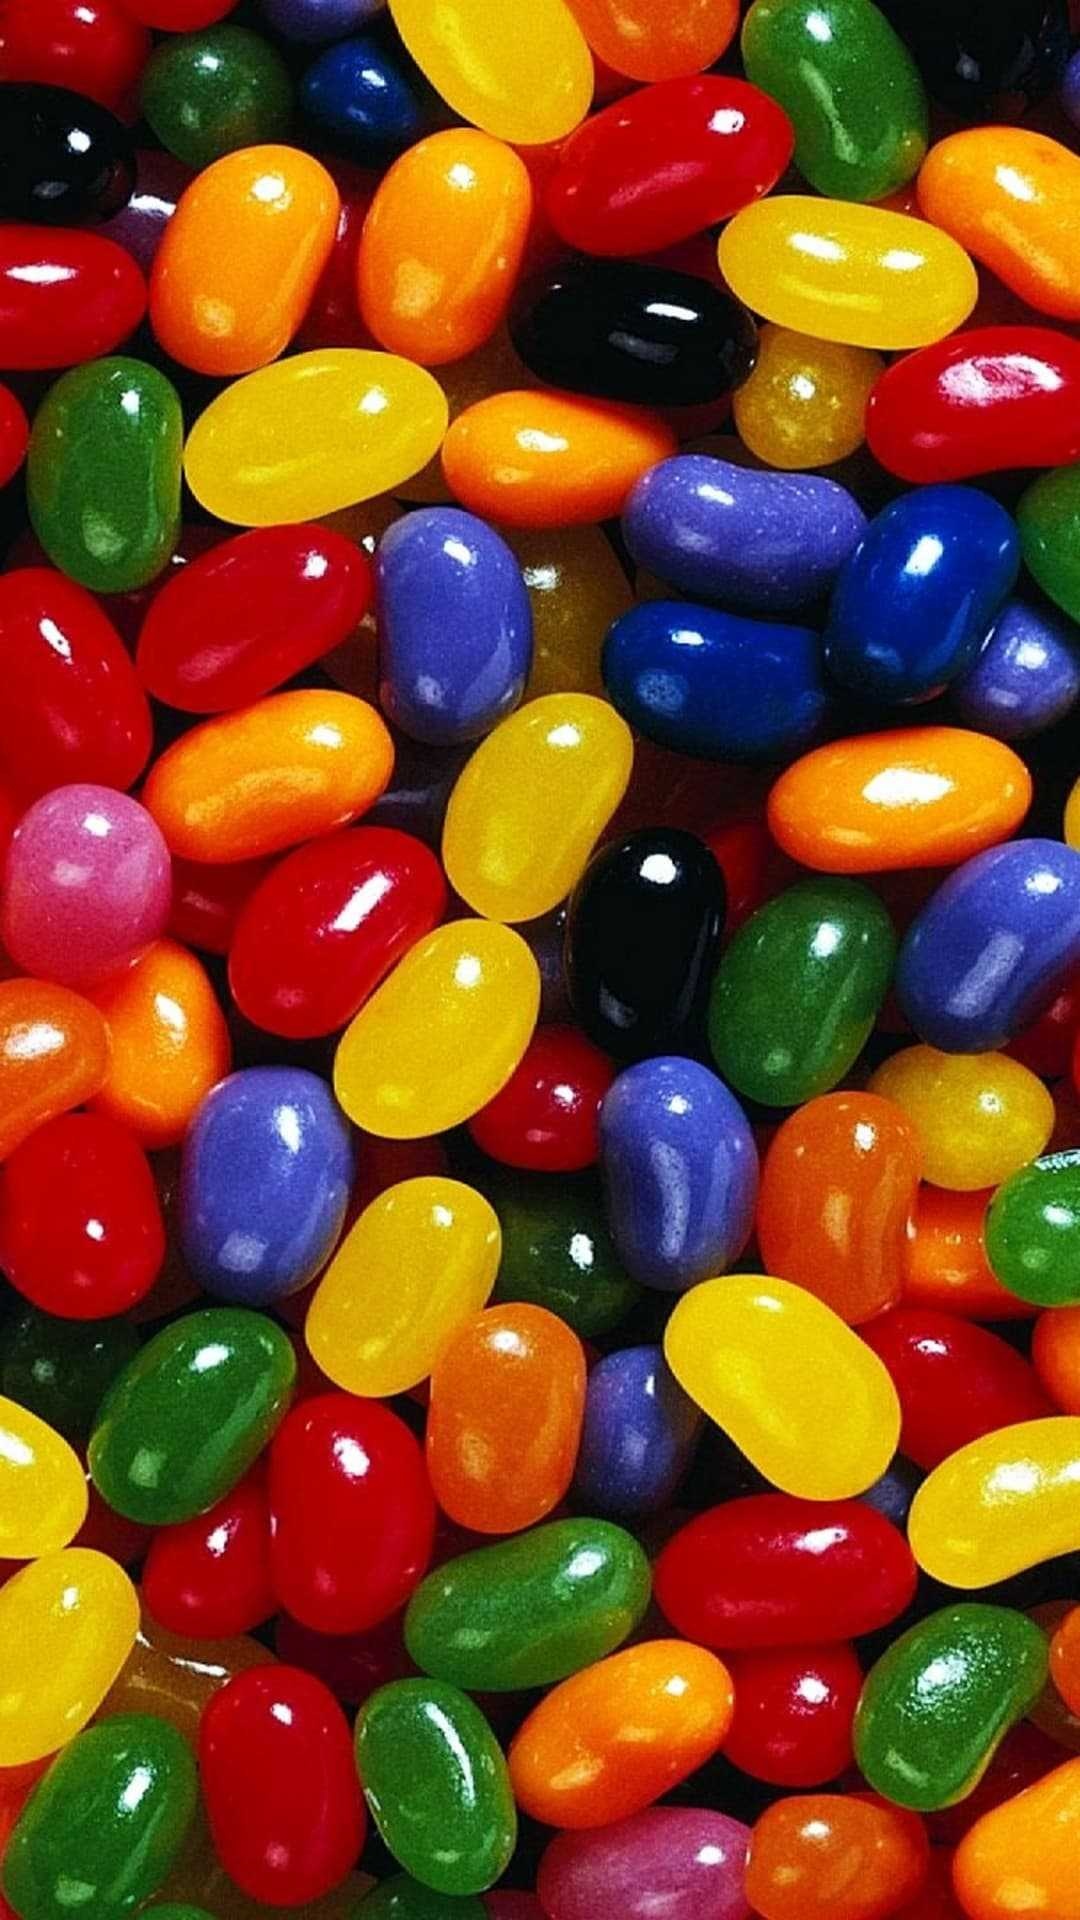 Colorful candy wallpaper, Sweet and vibrant, Eye-catching designs, Sugary pleasure, 1080x1920 Full HD Phone